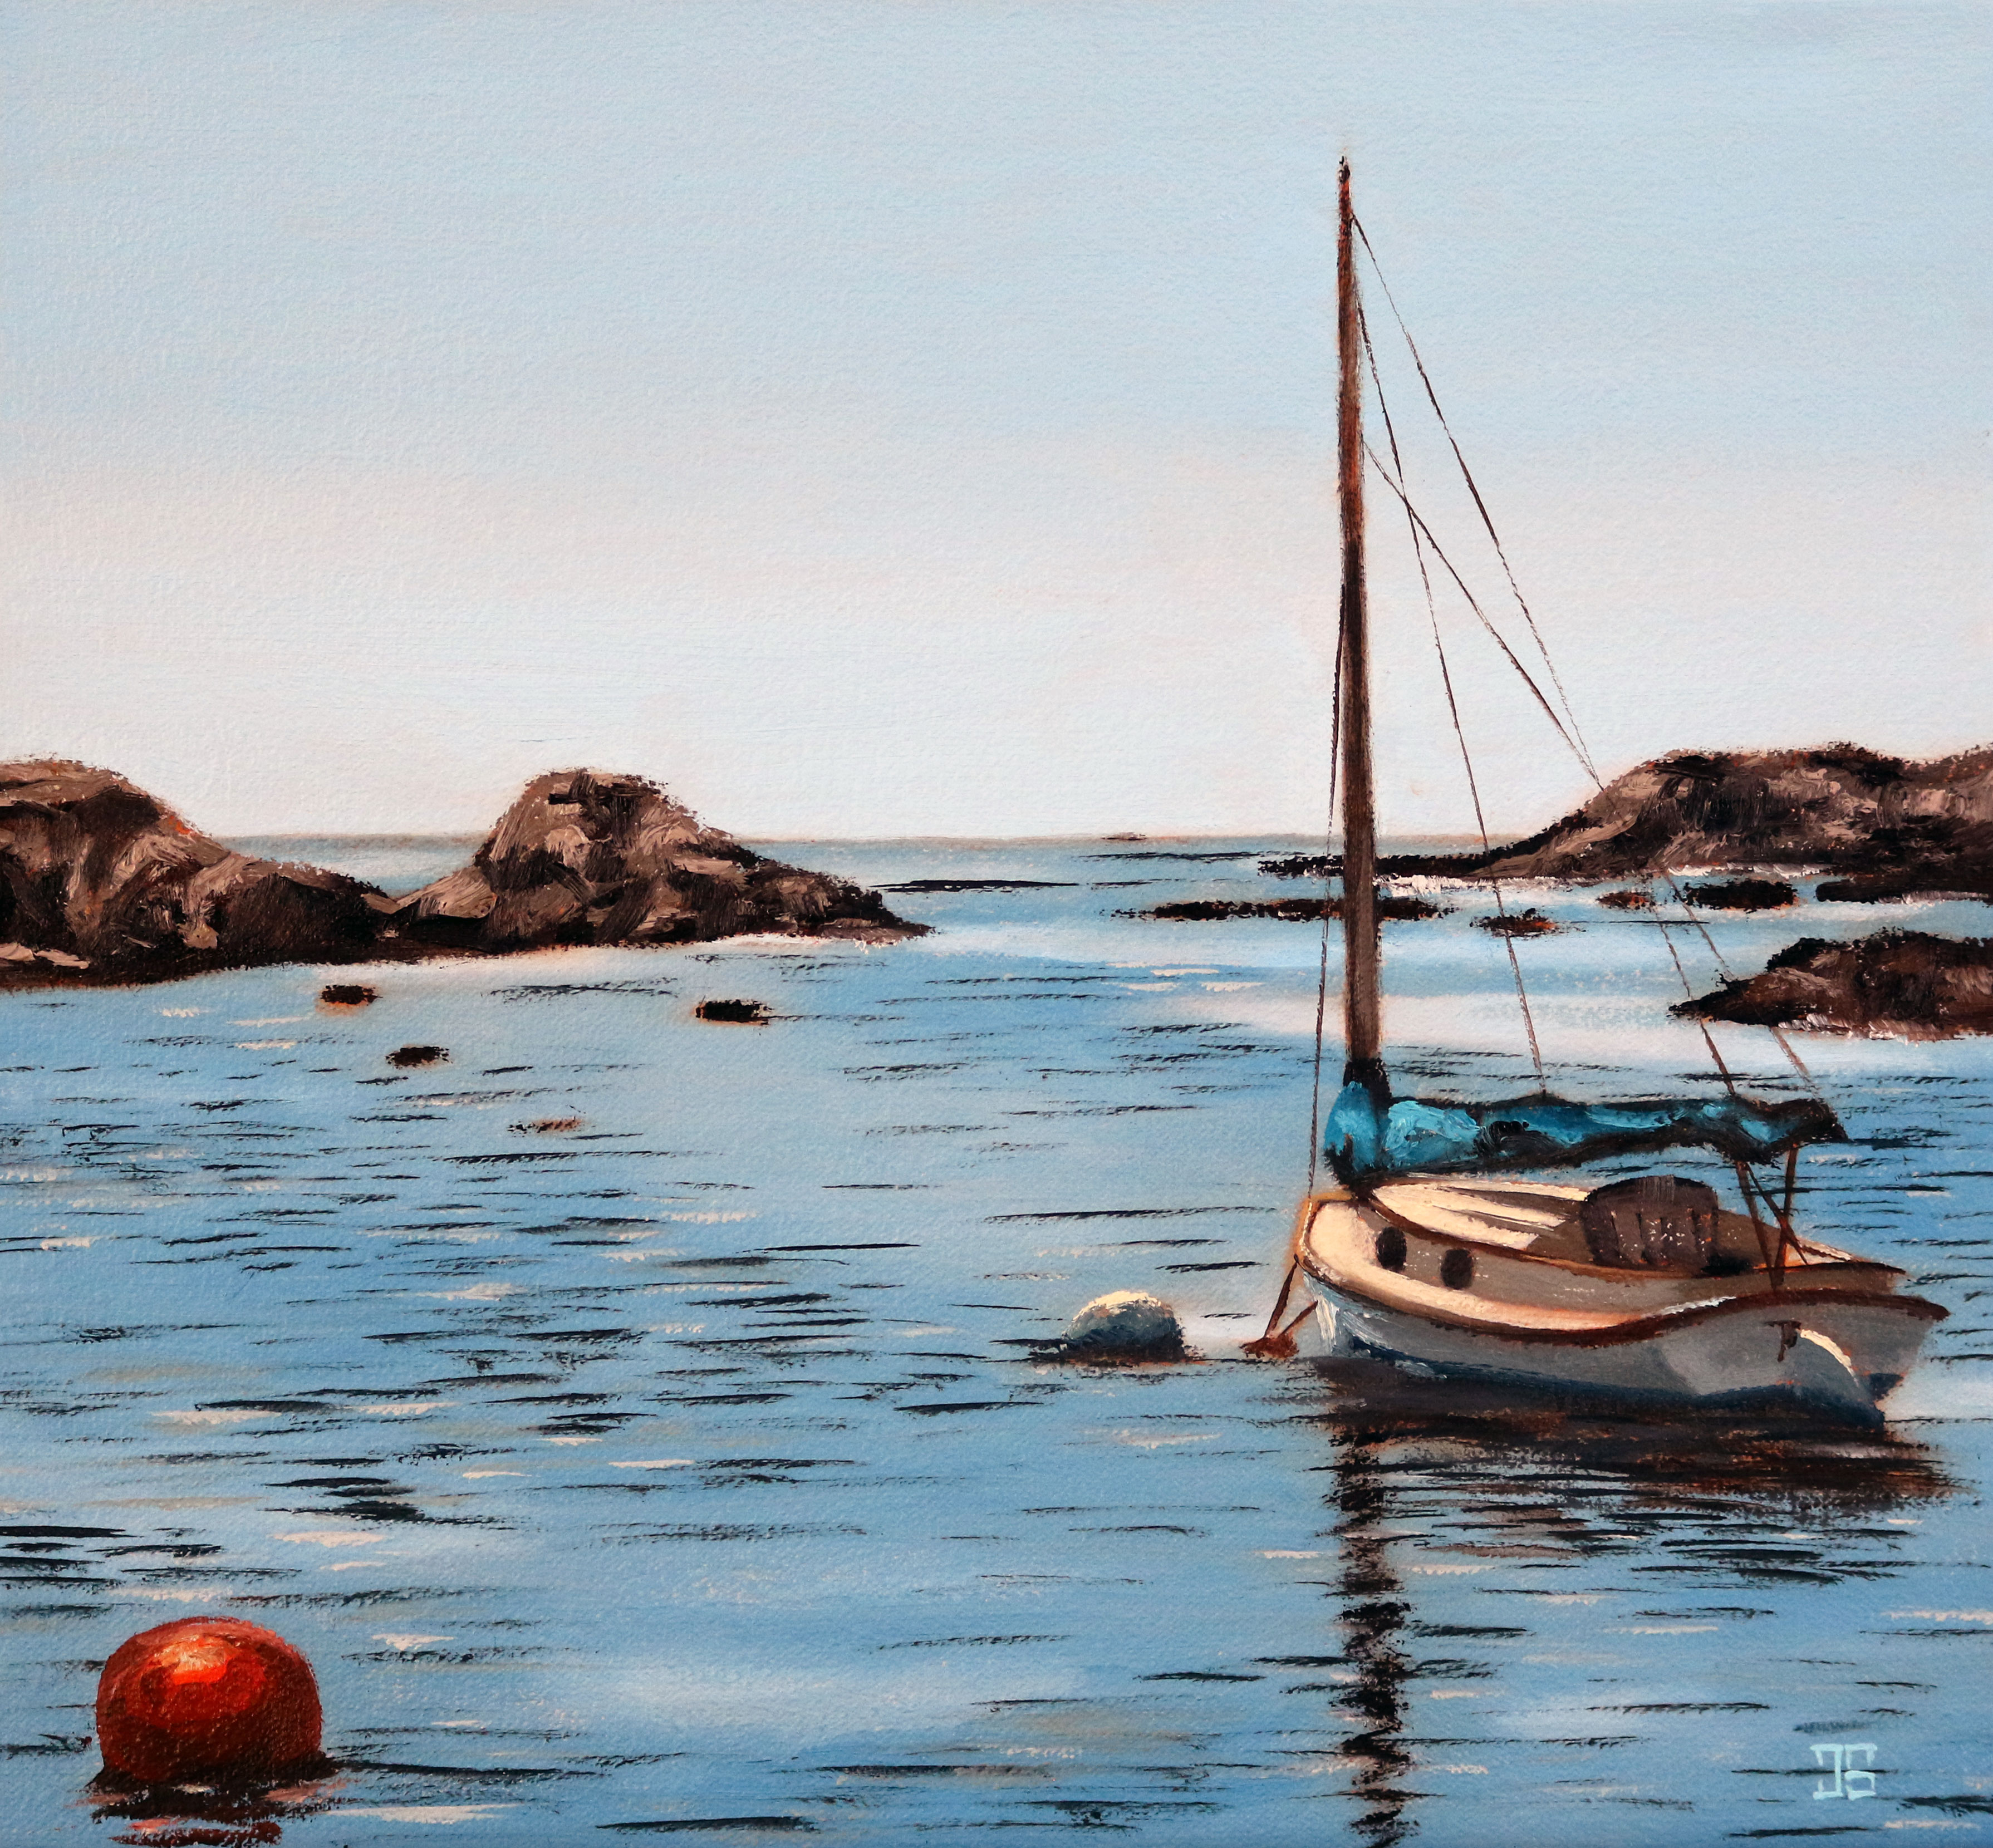 Oil painting "Newport Sailboat" by Jeffrey Dale Starr